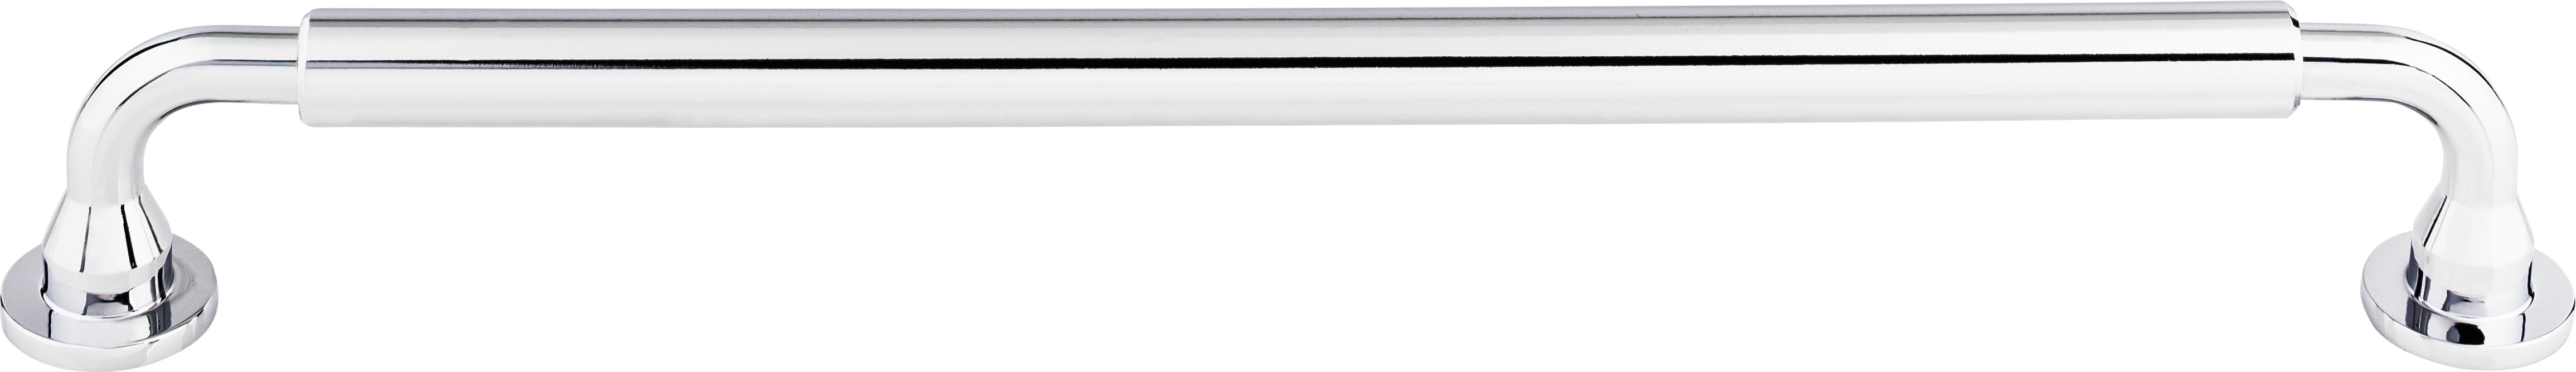 Lily Appliance Pull 12 Inch (c-c)